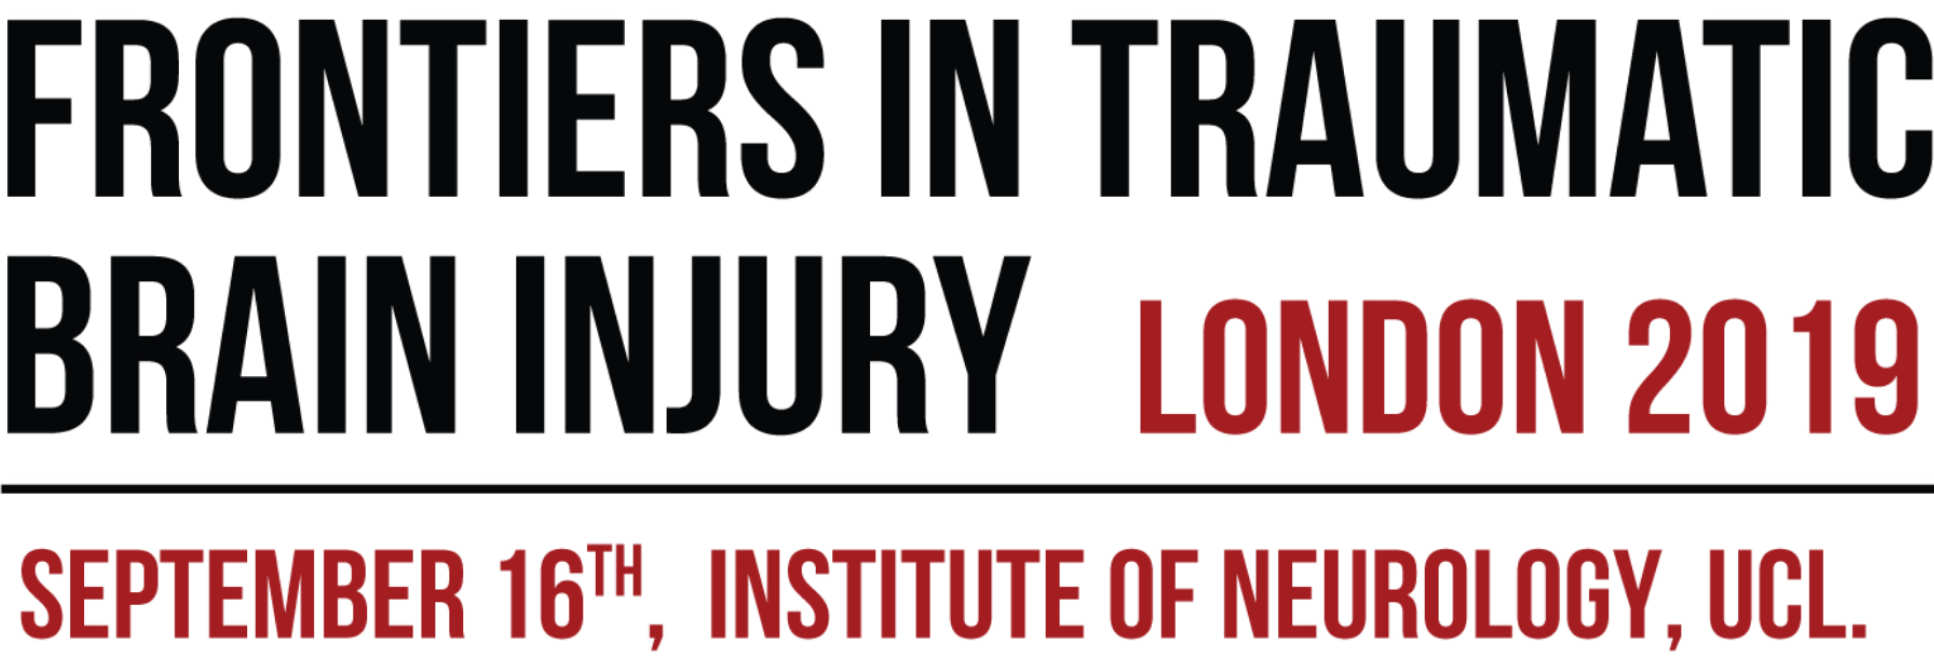 Frontiers in TBI, London Sept 16th 2019, ION at UCL